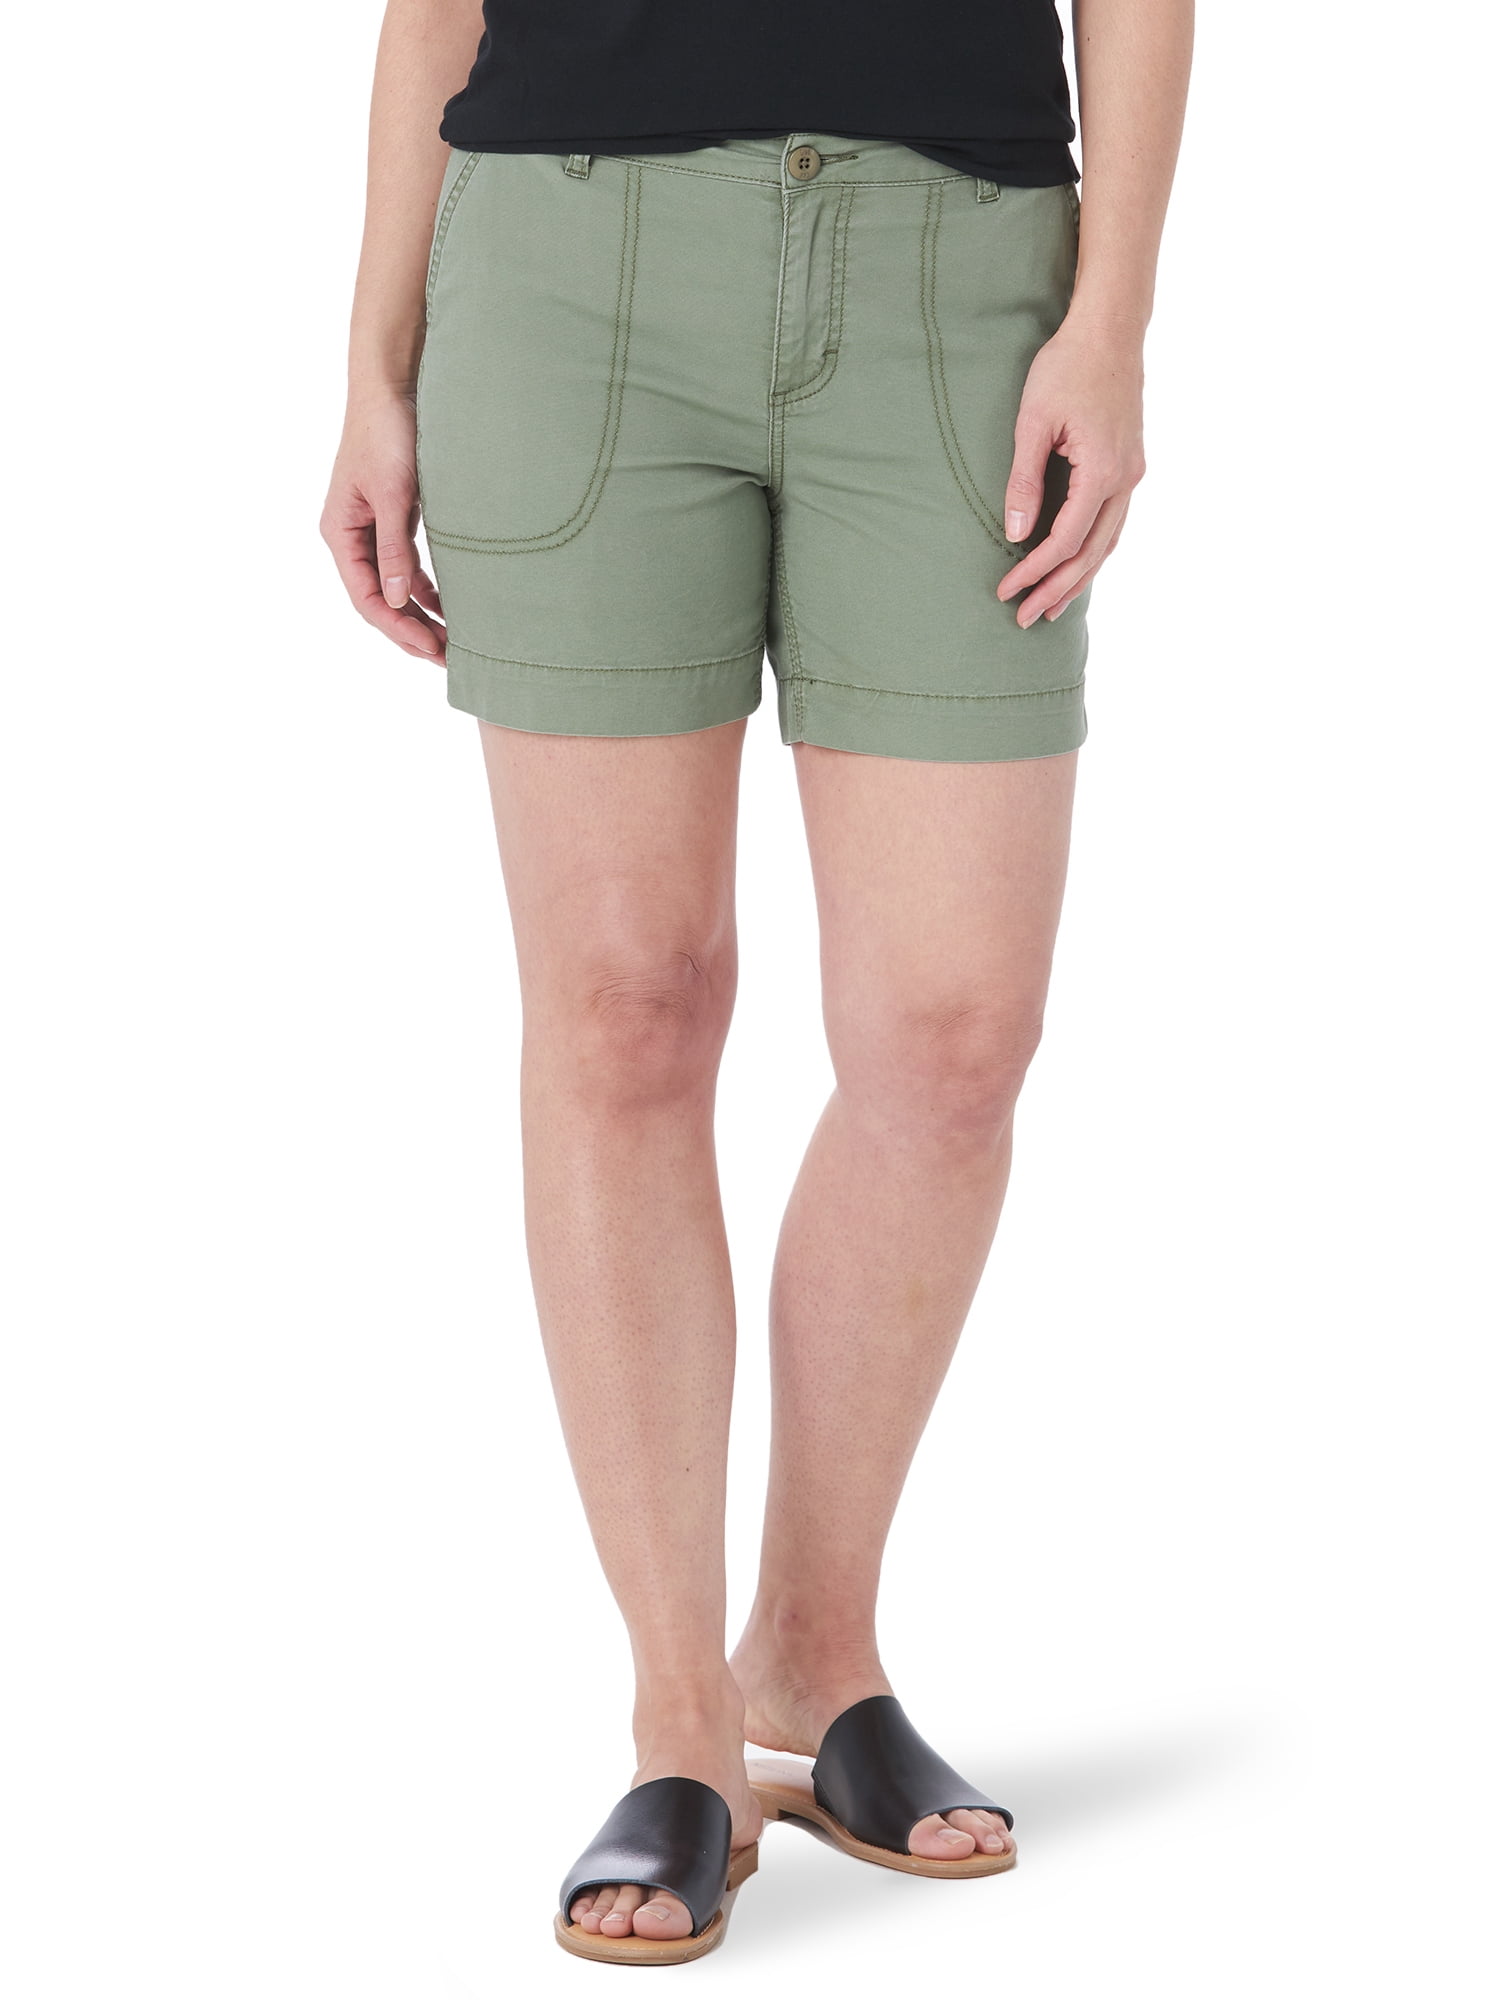 NEW Women's Lee Henley Bermuda Cargo Shorts Mid Rise Fit Cargo Stretch 